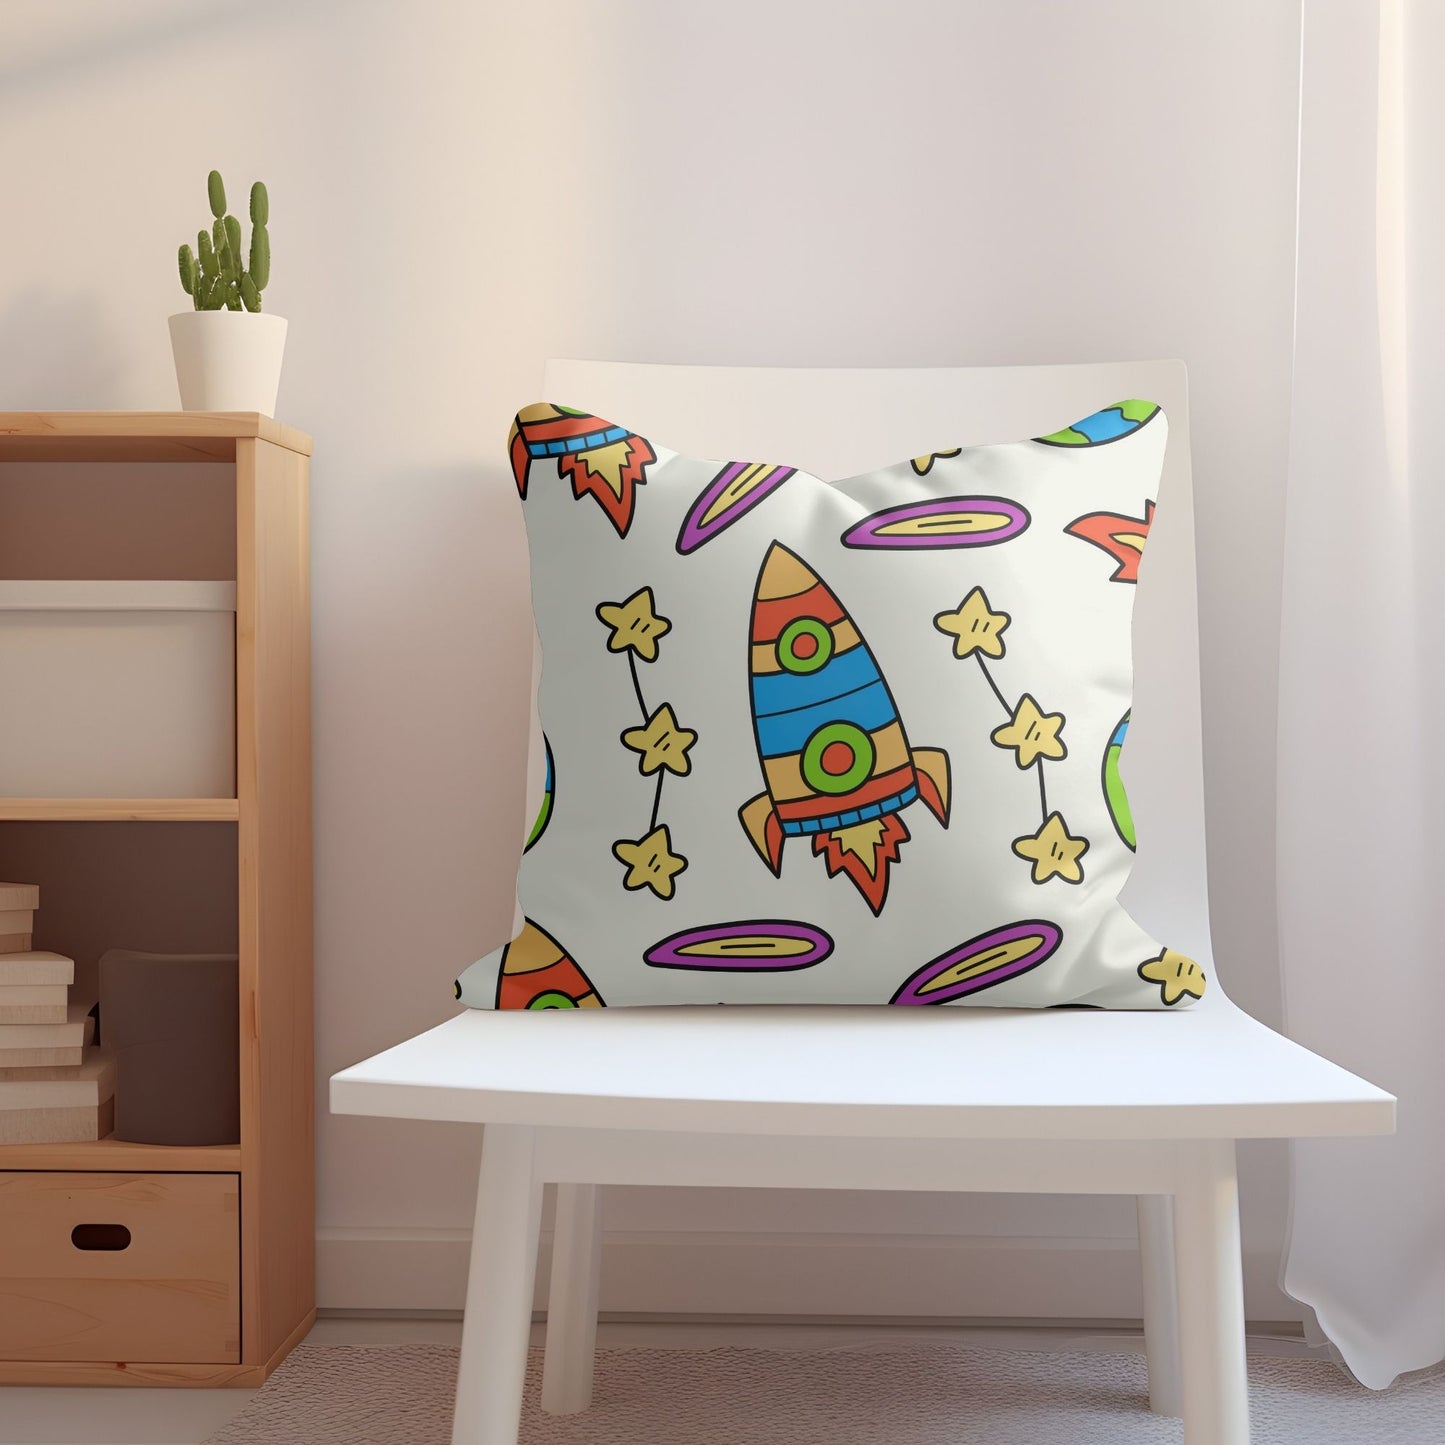 Rocket ship pillow perfect for young space explorers to cuddle with.